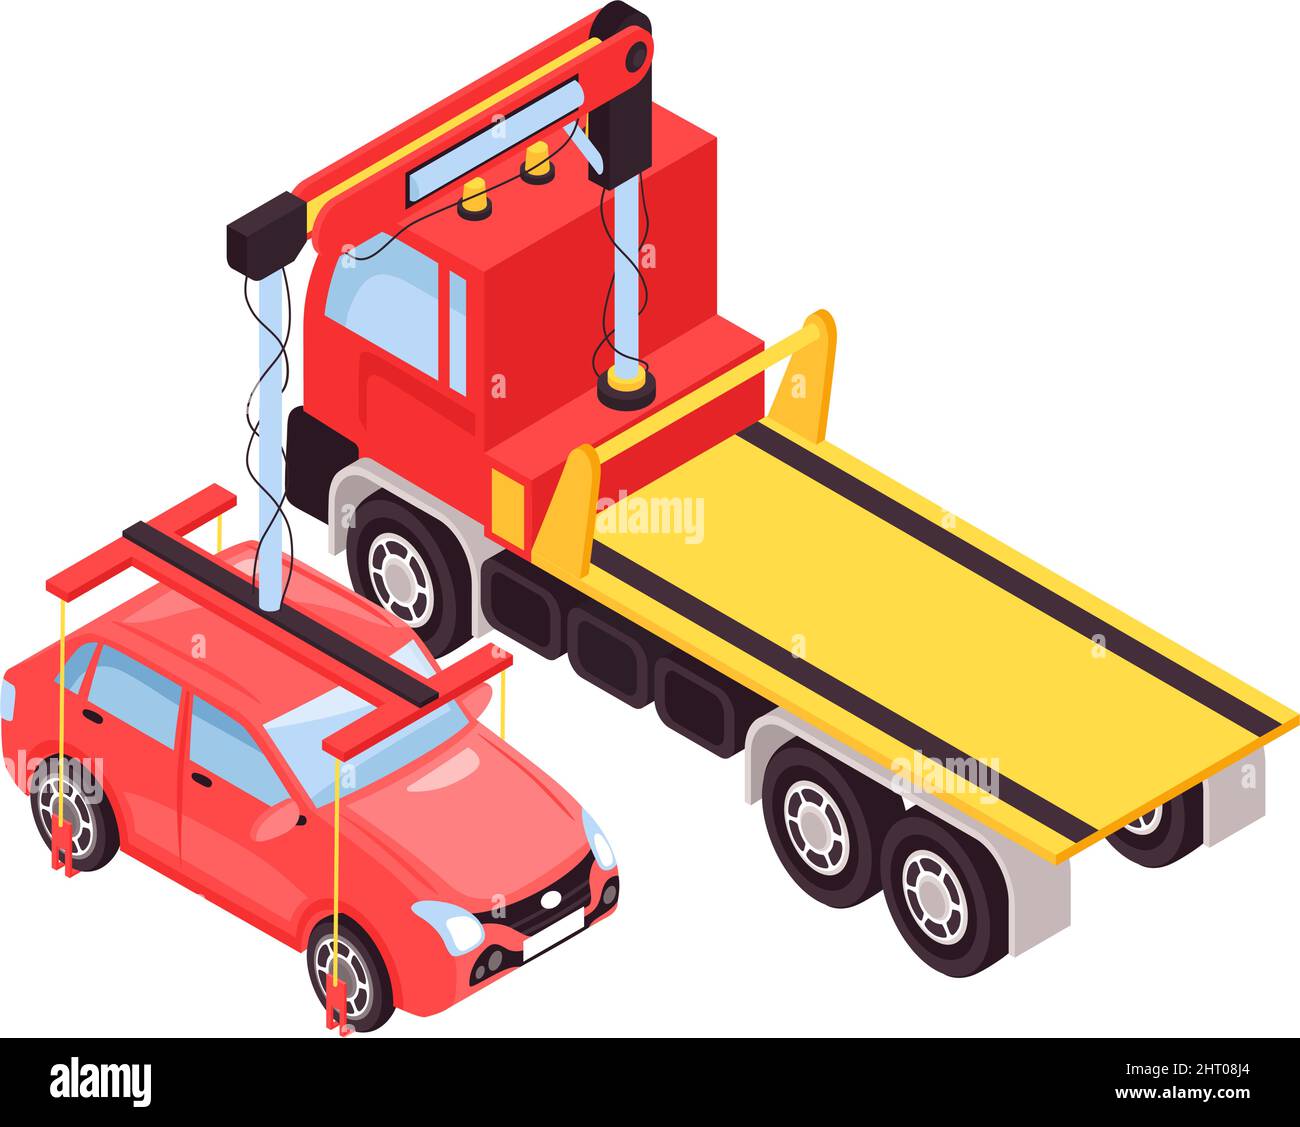 Isometric tow truck car vehicle transportation help road composition with isolated image vector illustration Stock Vector